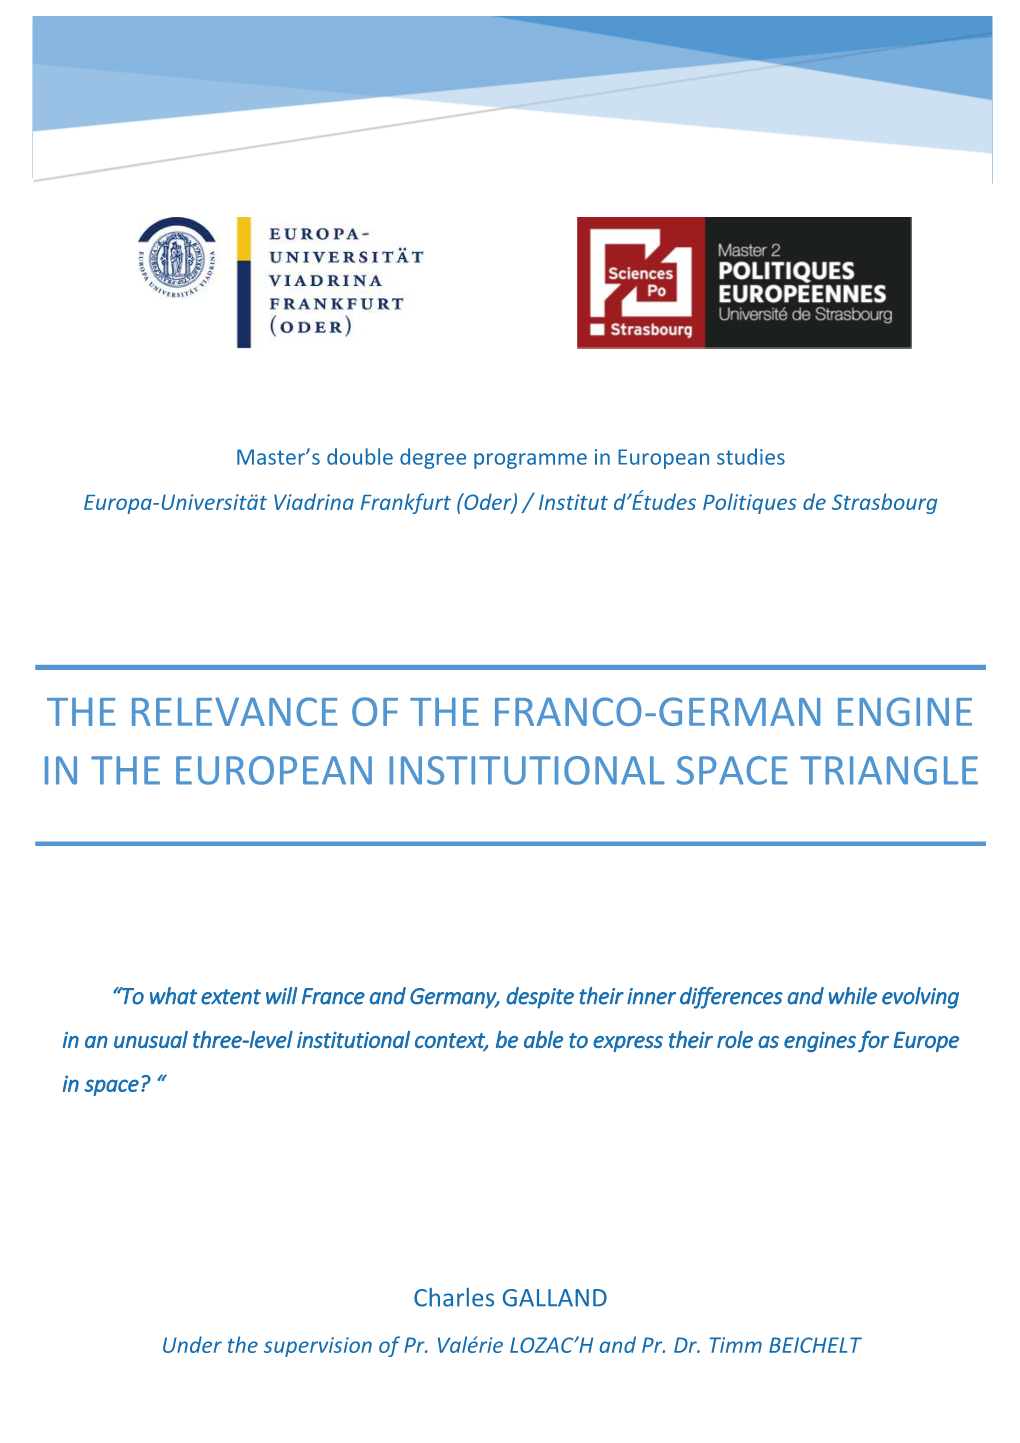 The Relevance of the Franco-German Engine in the European Institutional Space Triangle